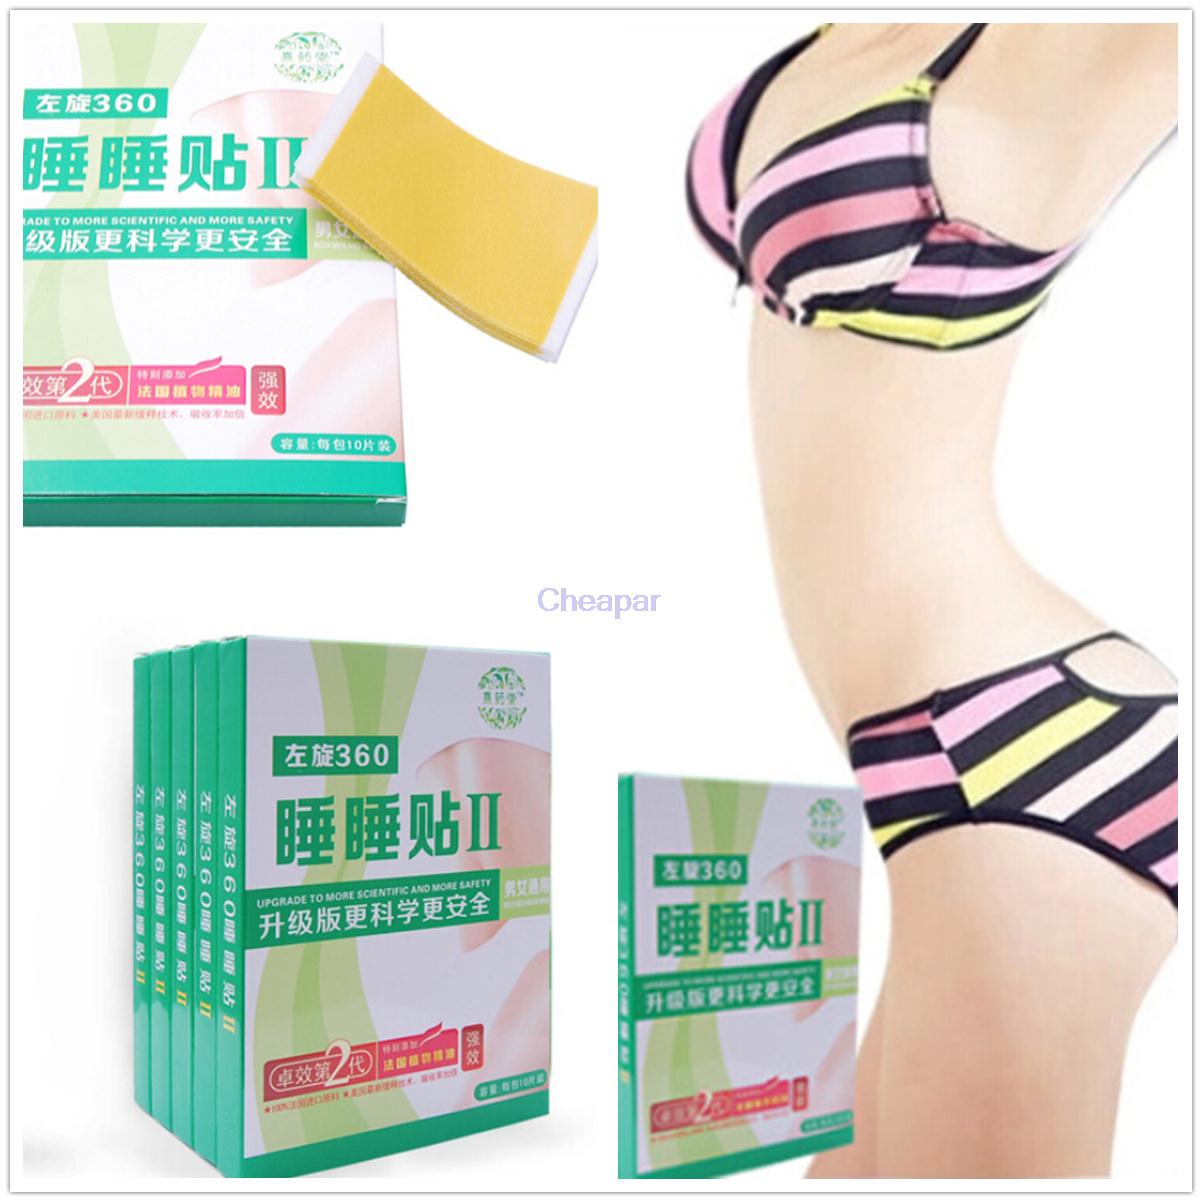 Hot Sale Convenient 10 PCS Health Patches Strong Burning Slimming Diet Weight Loss Adhesive Sheet